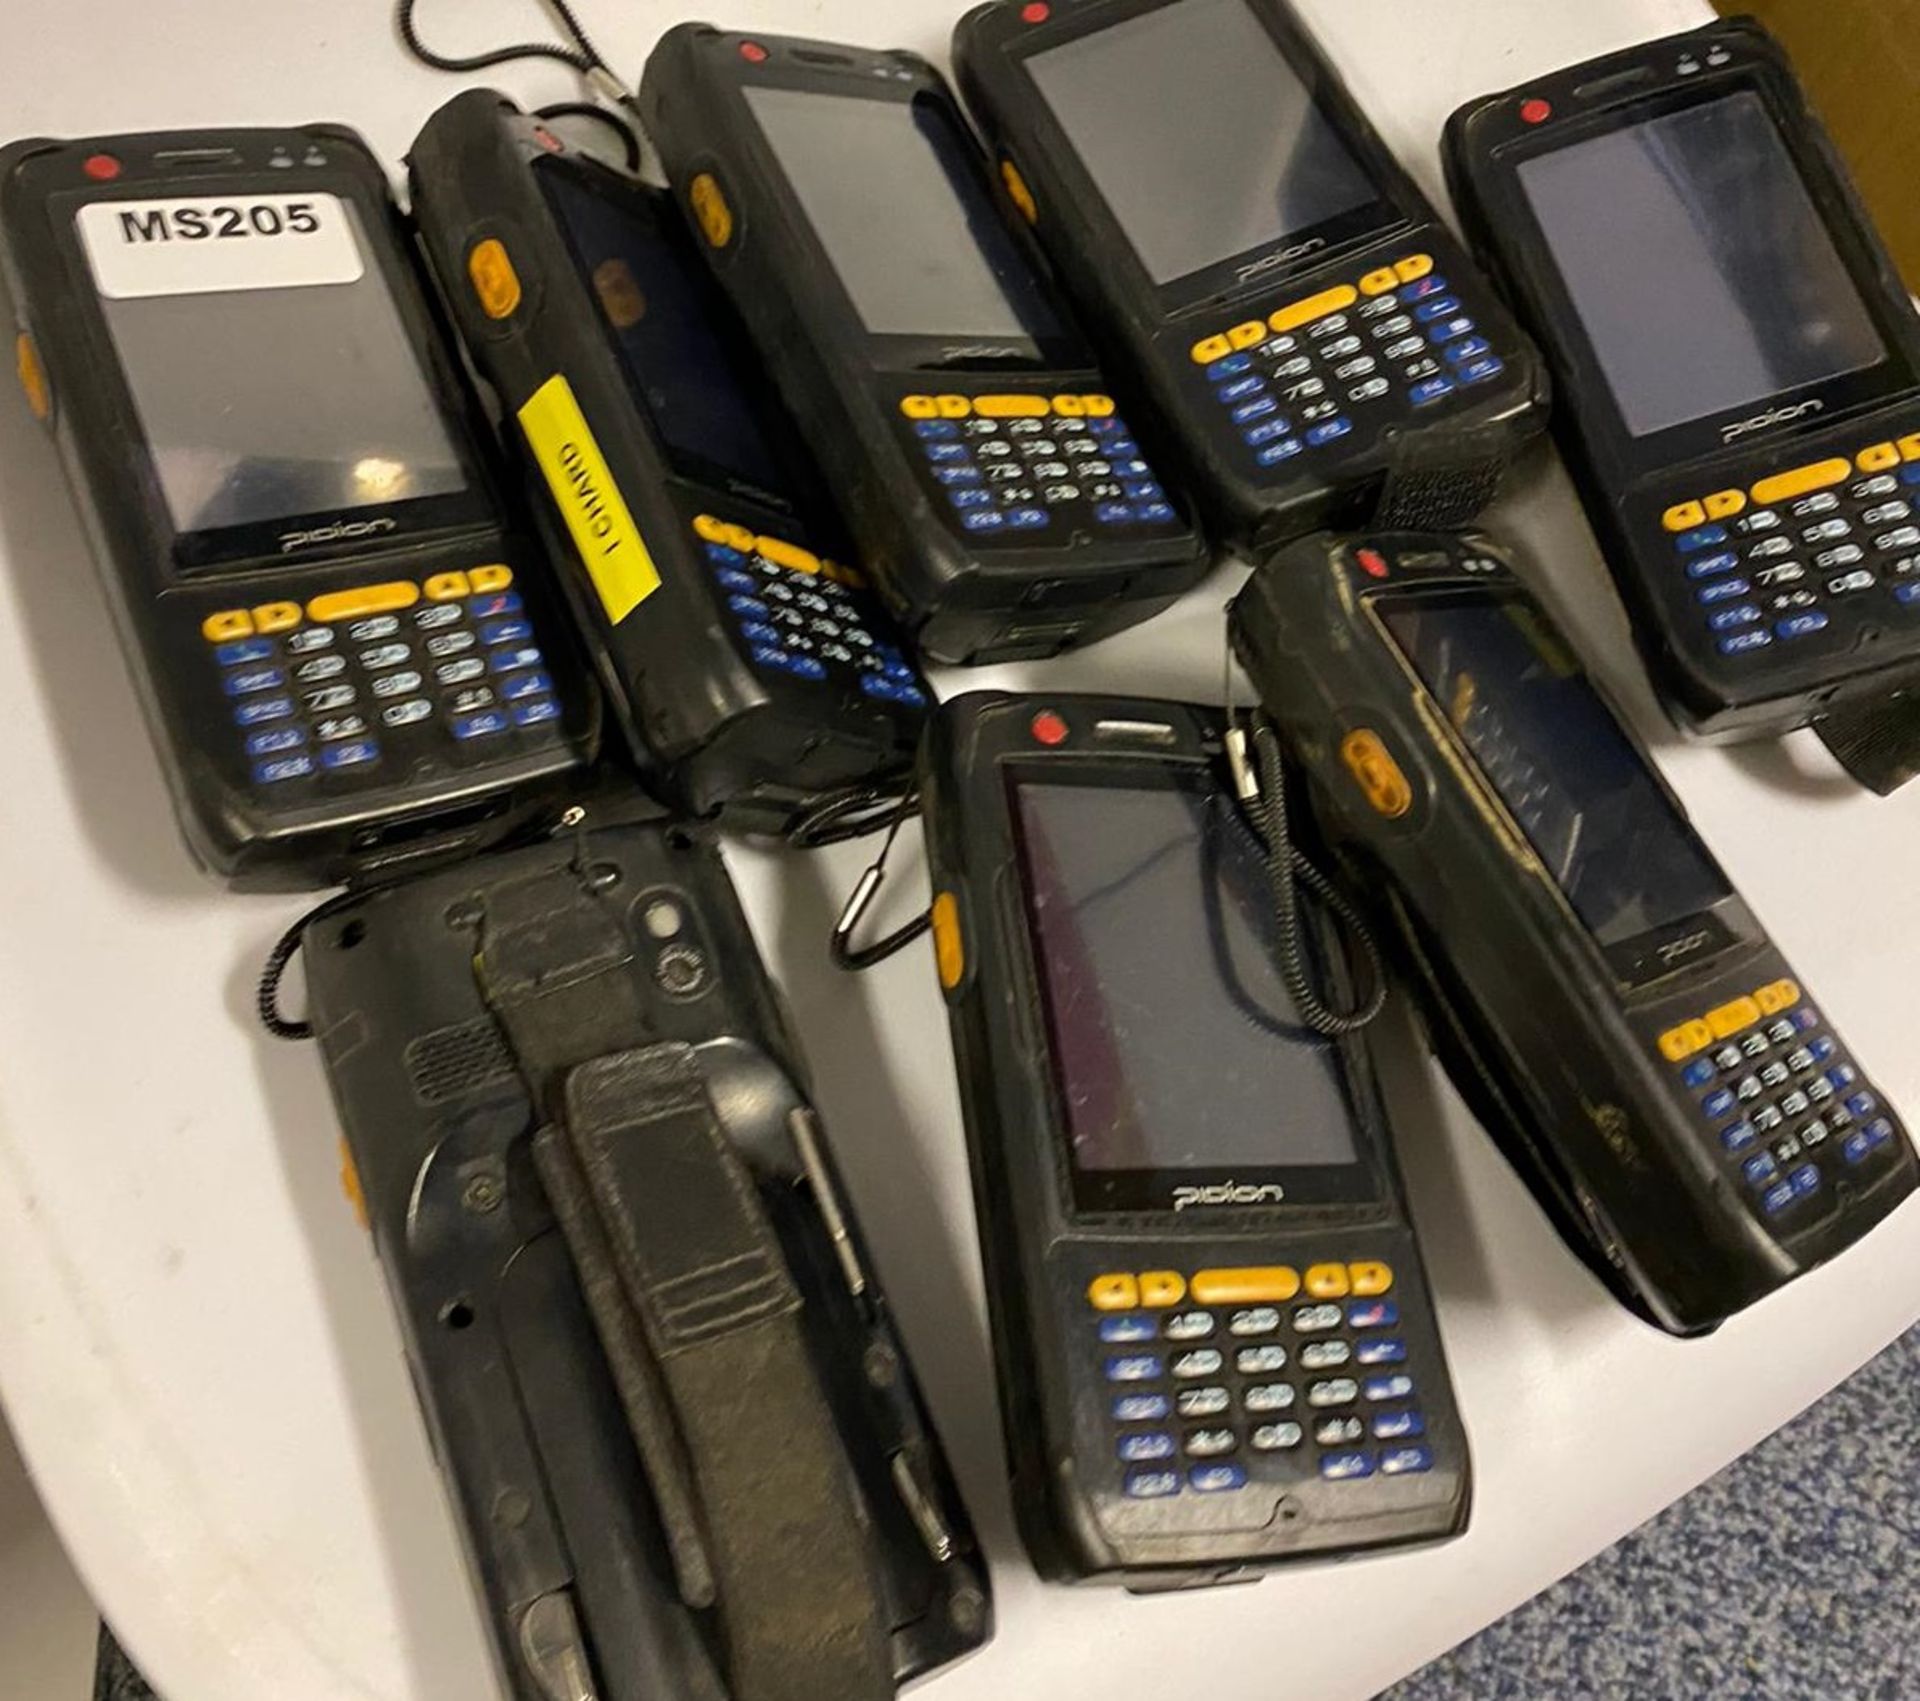 8 x Pidion BIP-6000 Handheld Mobile Computer With Barcode Scanning Capability - Used Condition - - Image 3 of 5